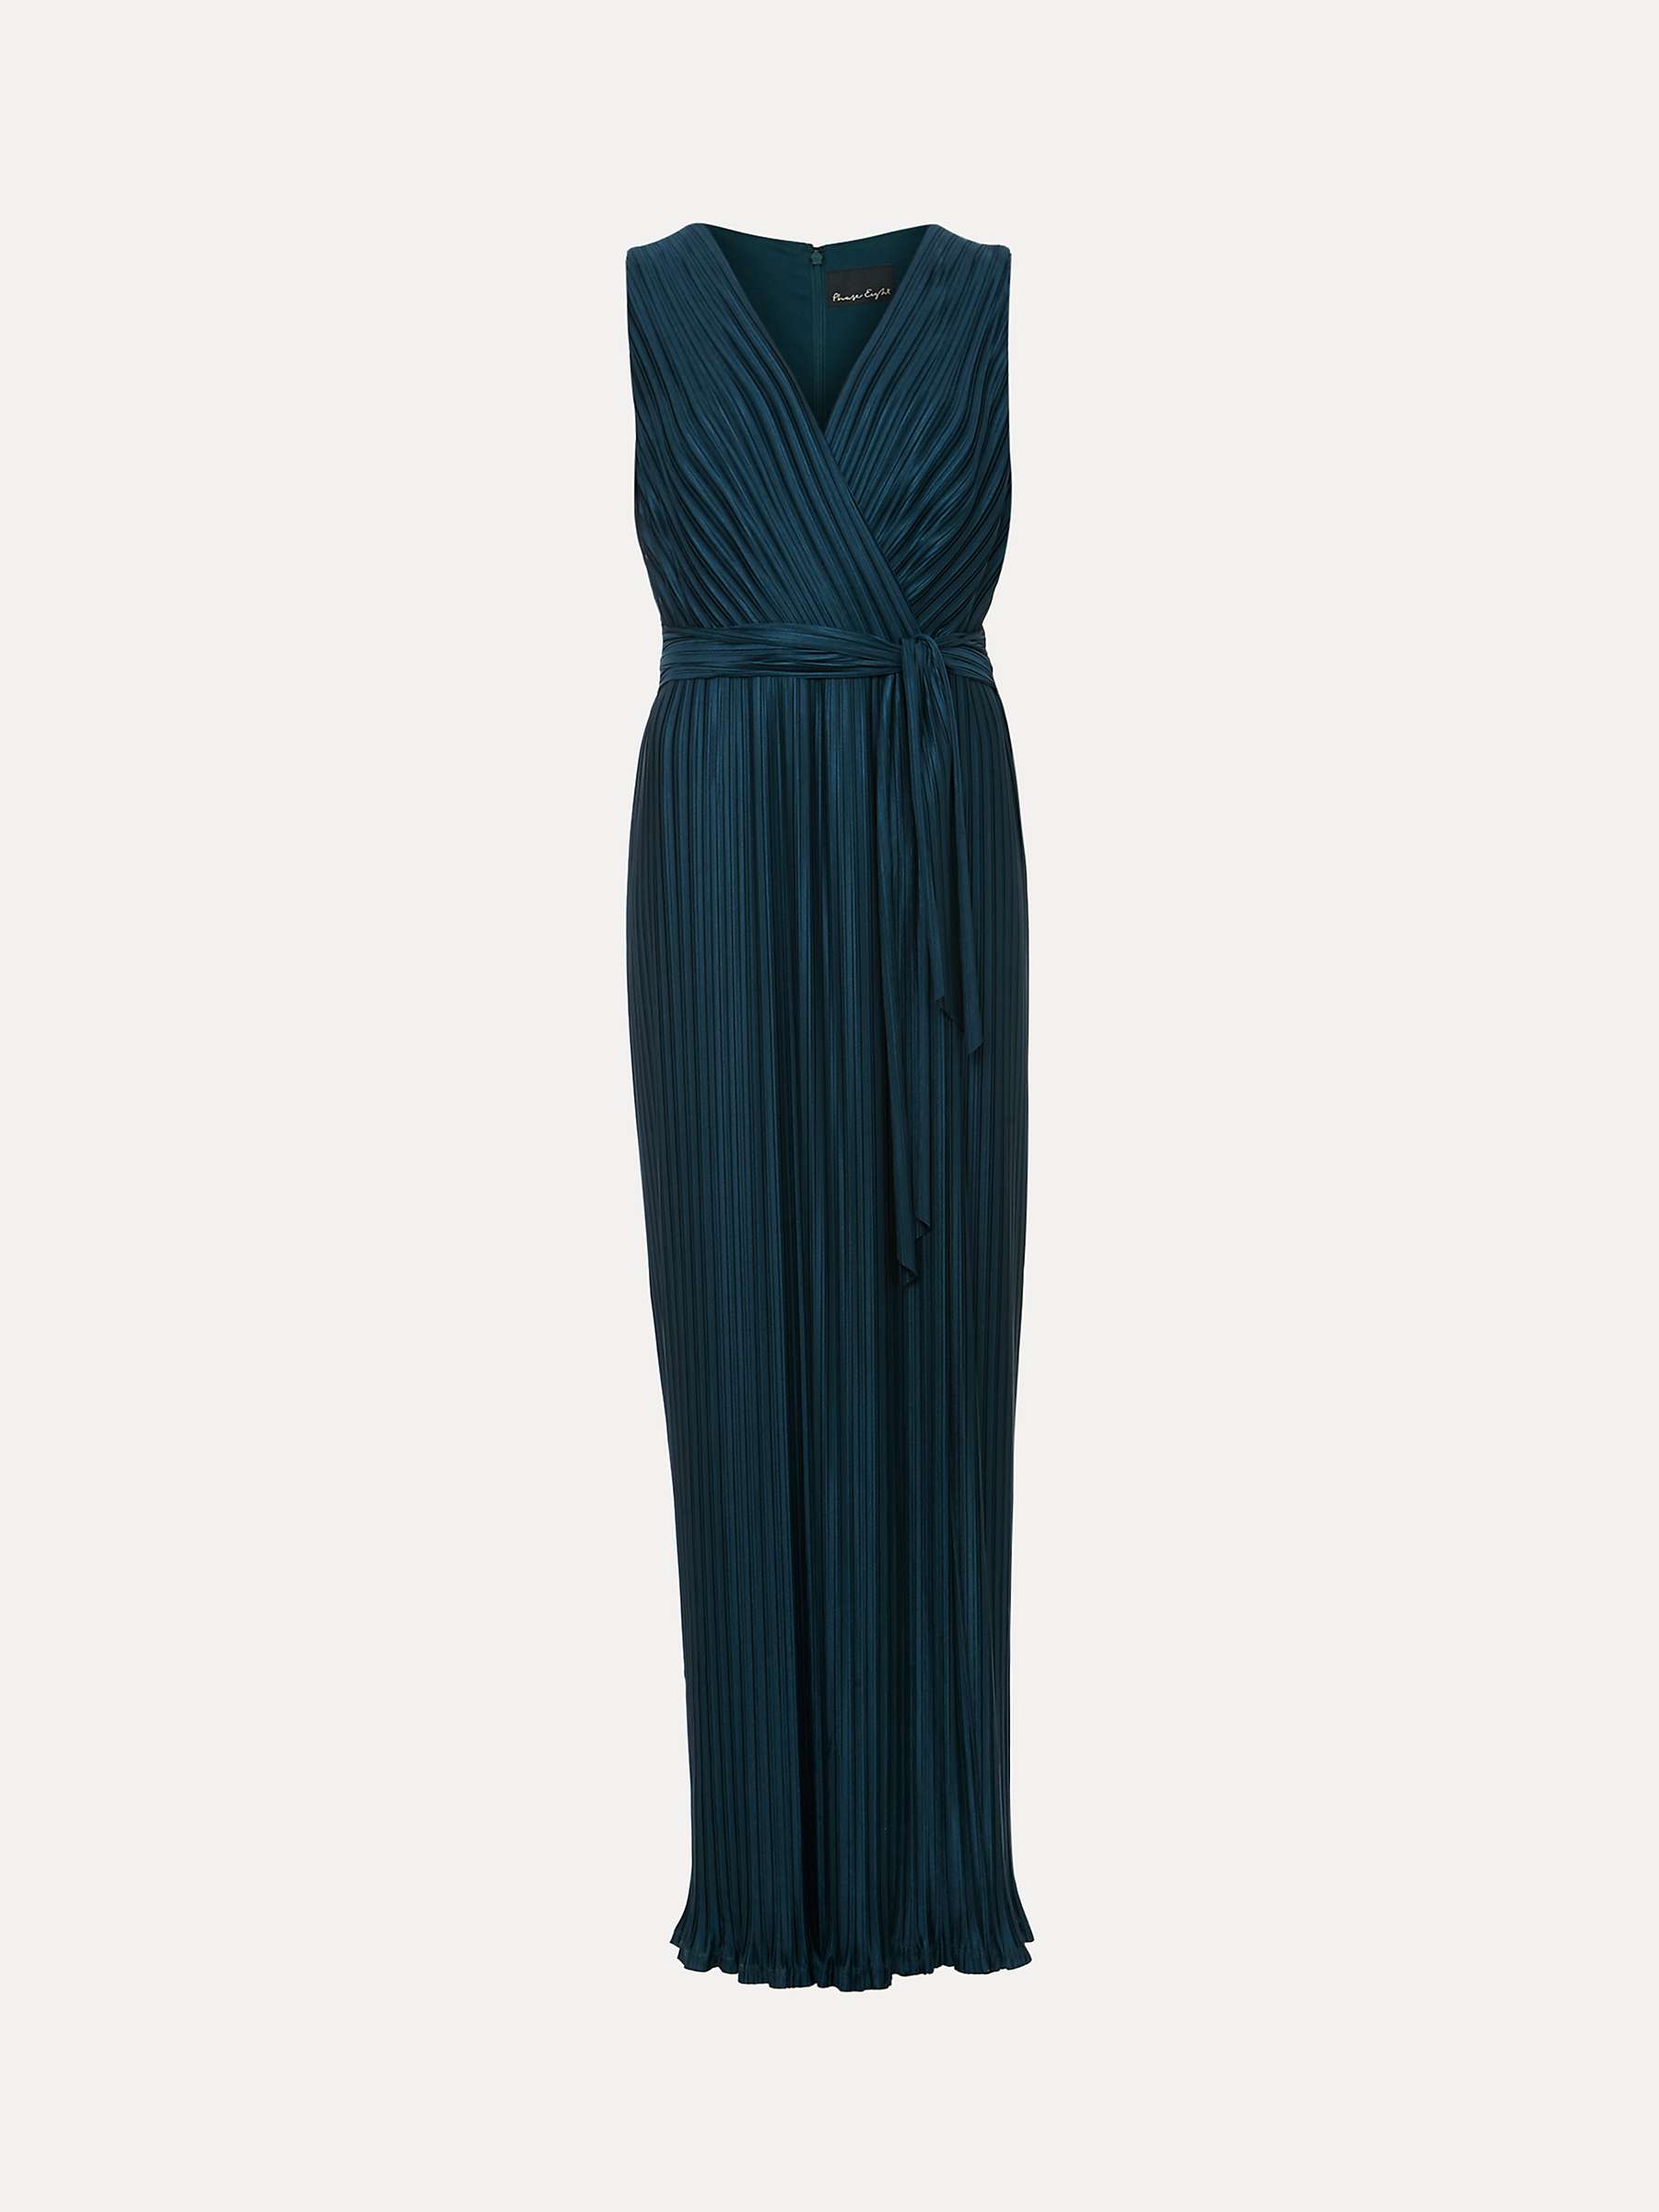 Buy Phase Eight Suhanna Pleated Maxi Dress, Green Online at johnlewis.com